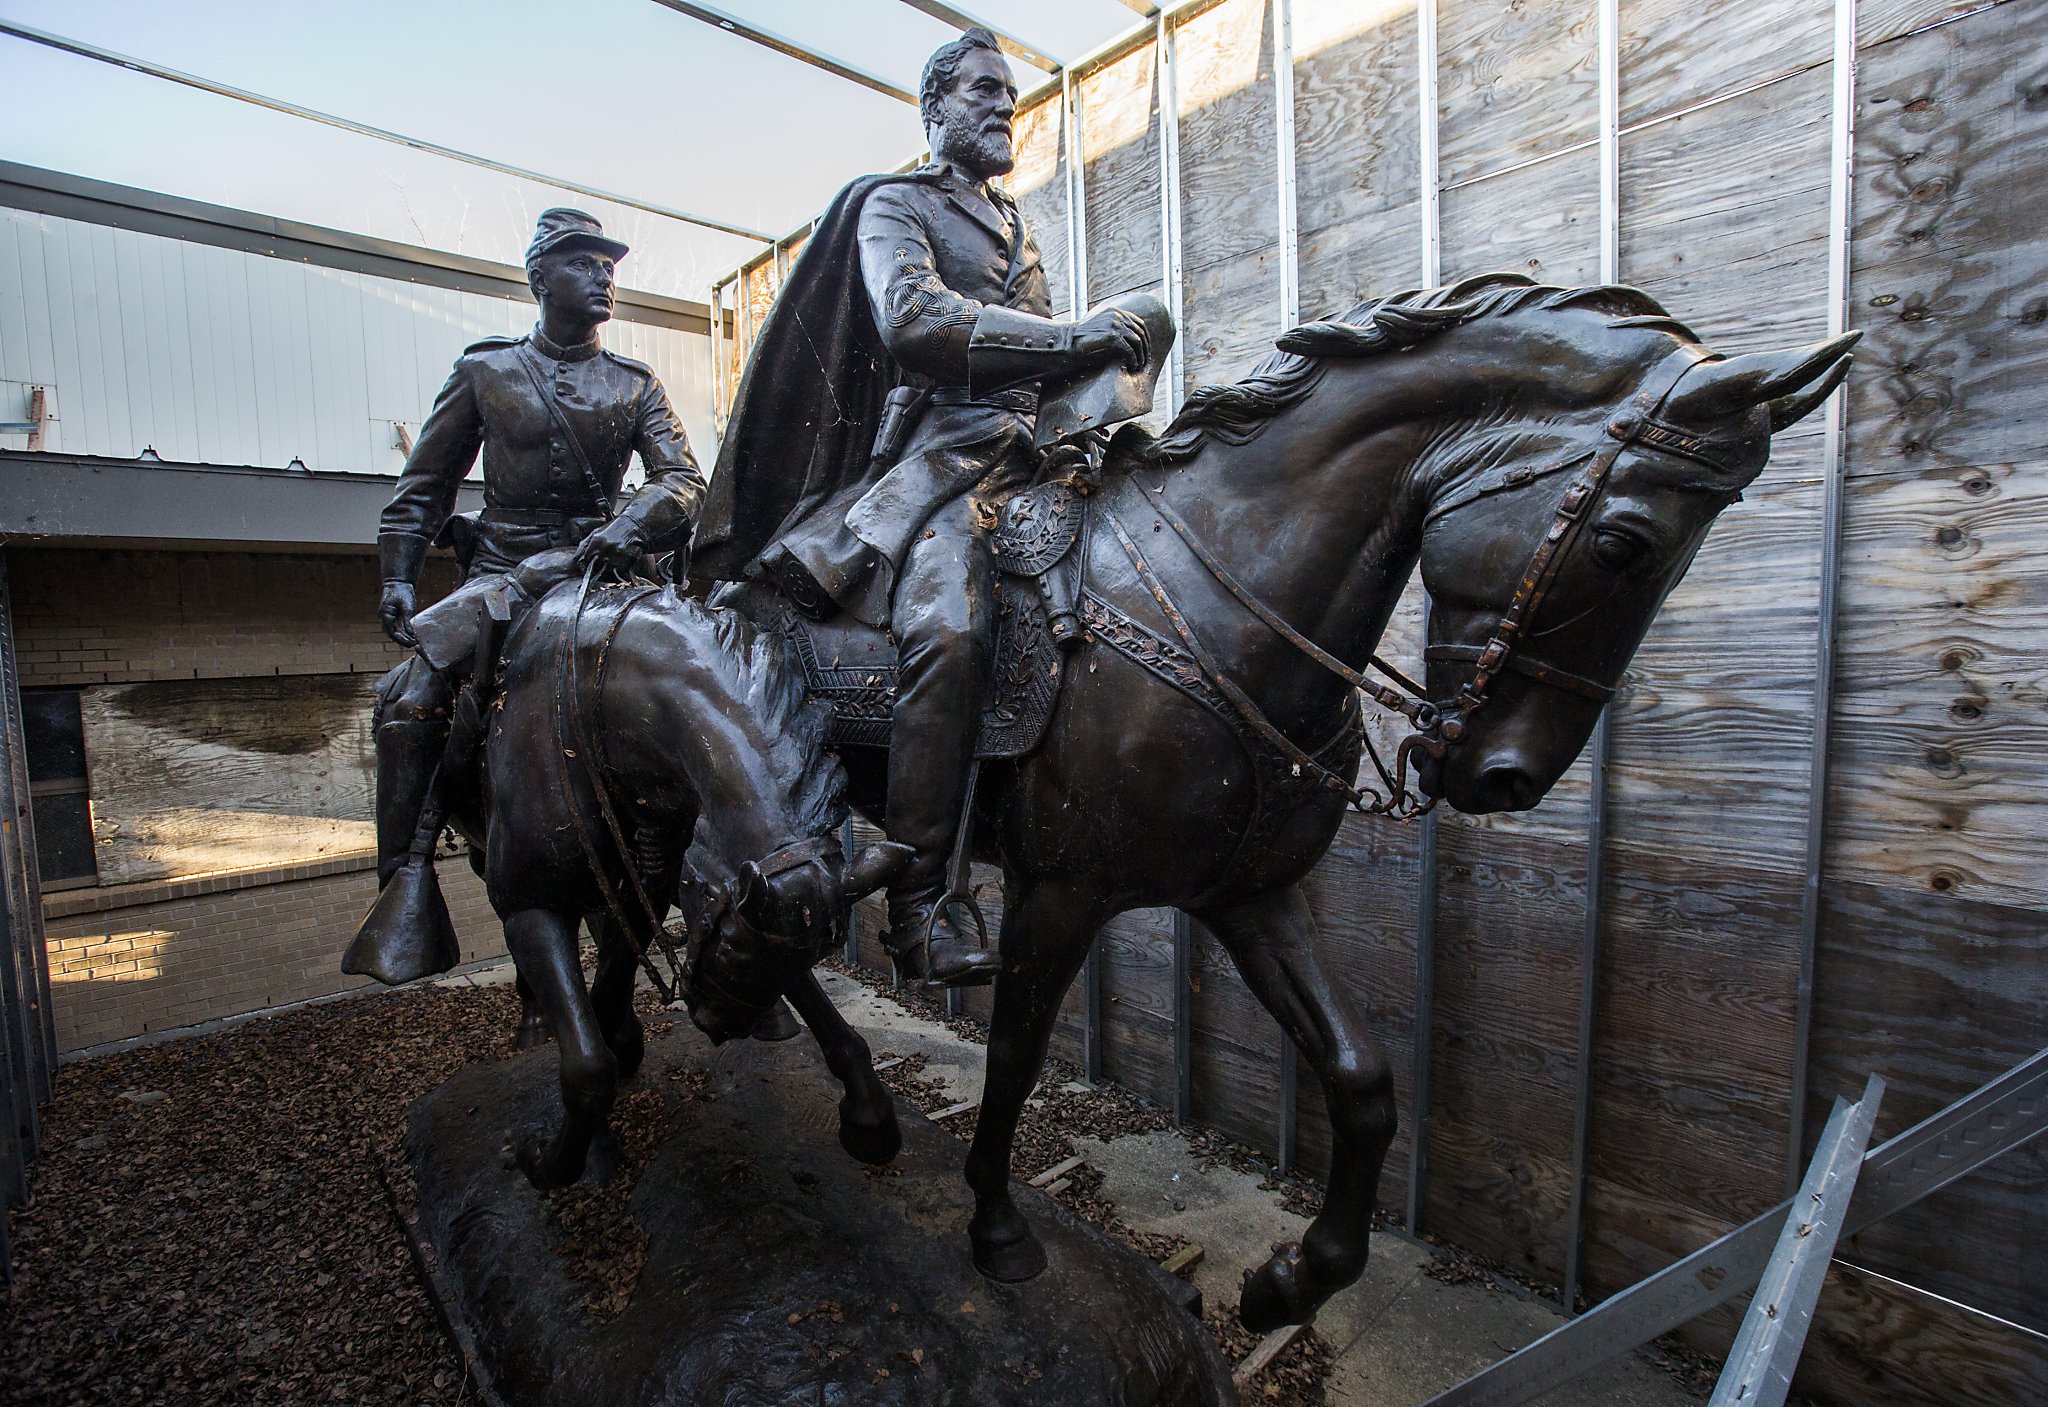 A removed statue dredges up racism against blacks, Latinos in Texas Rangers'  history